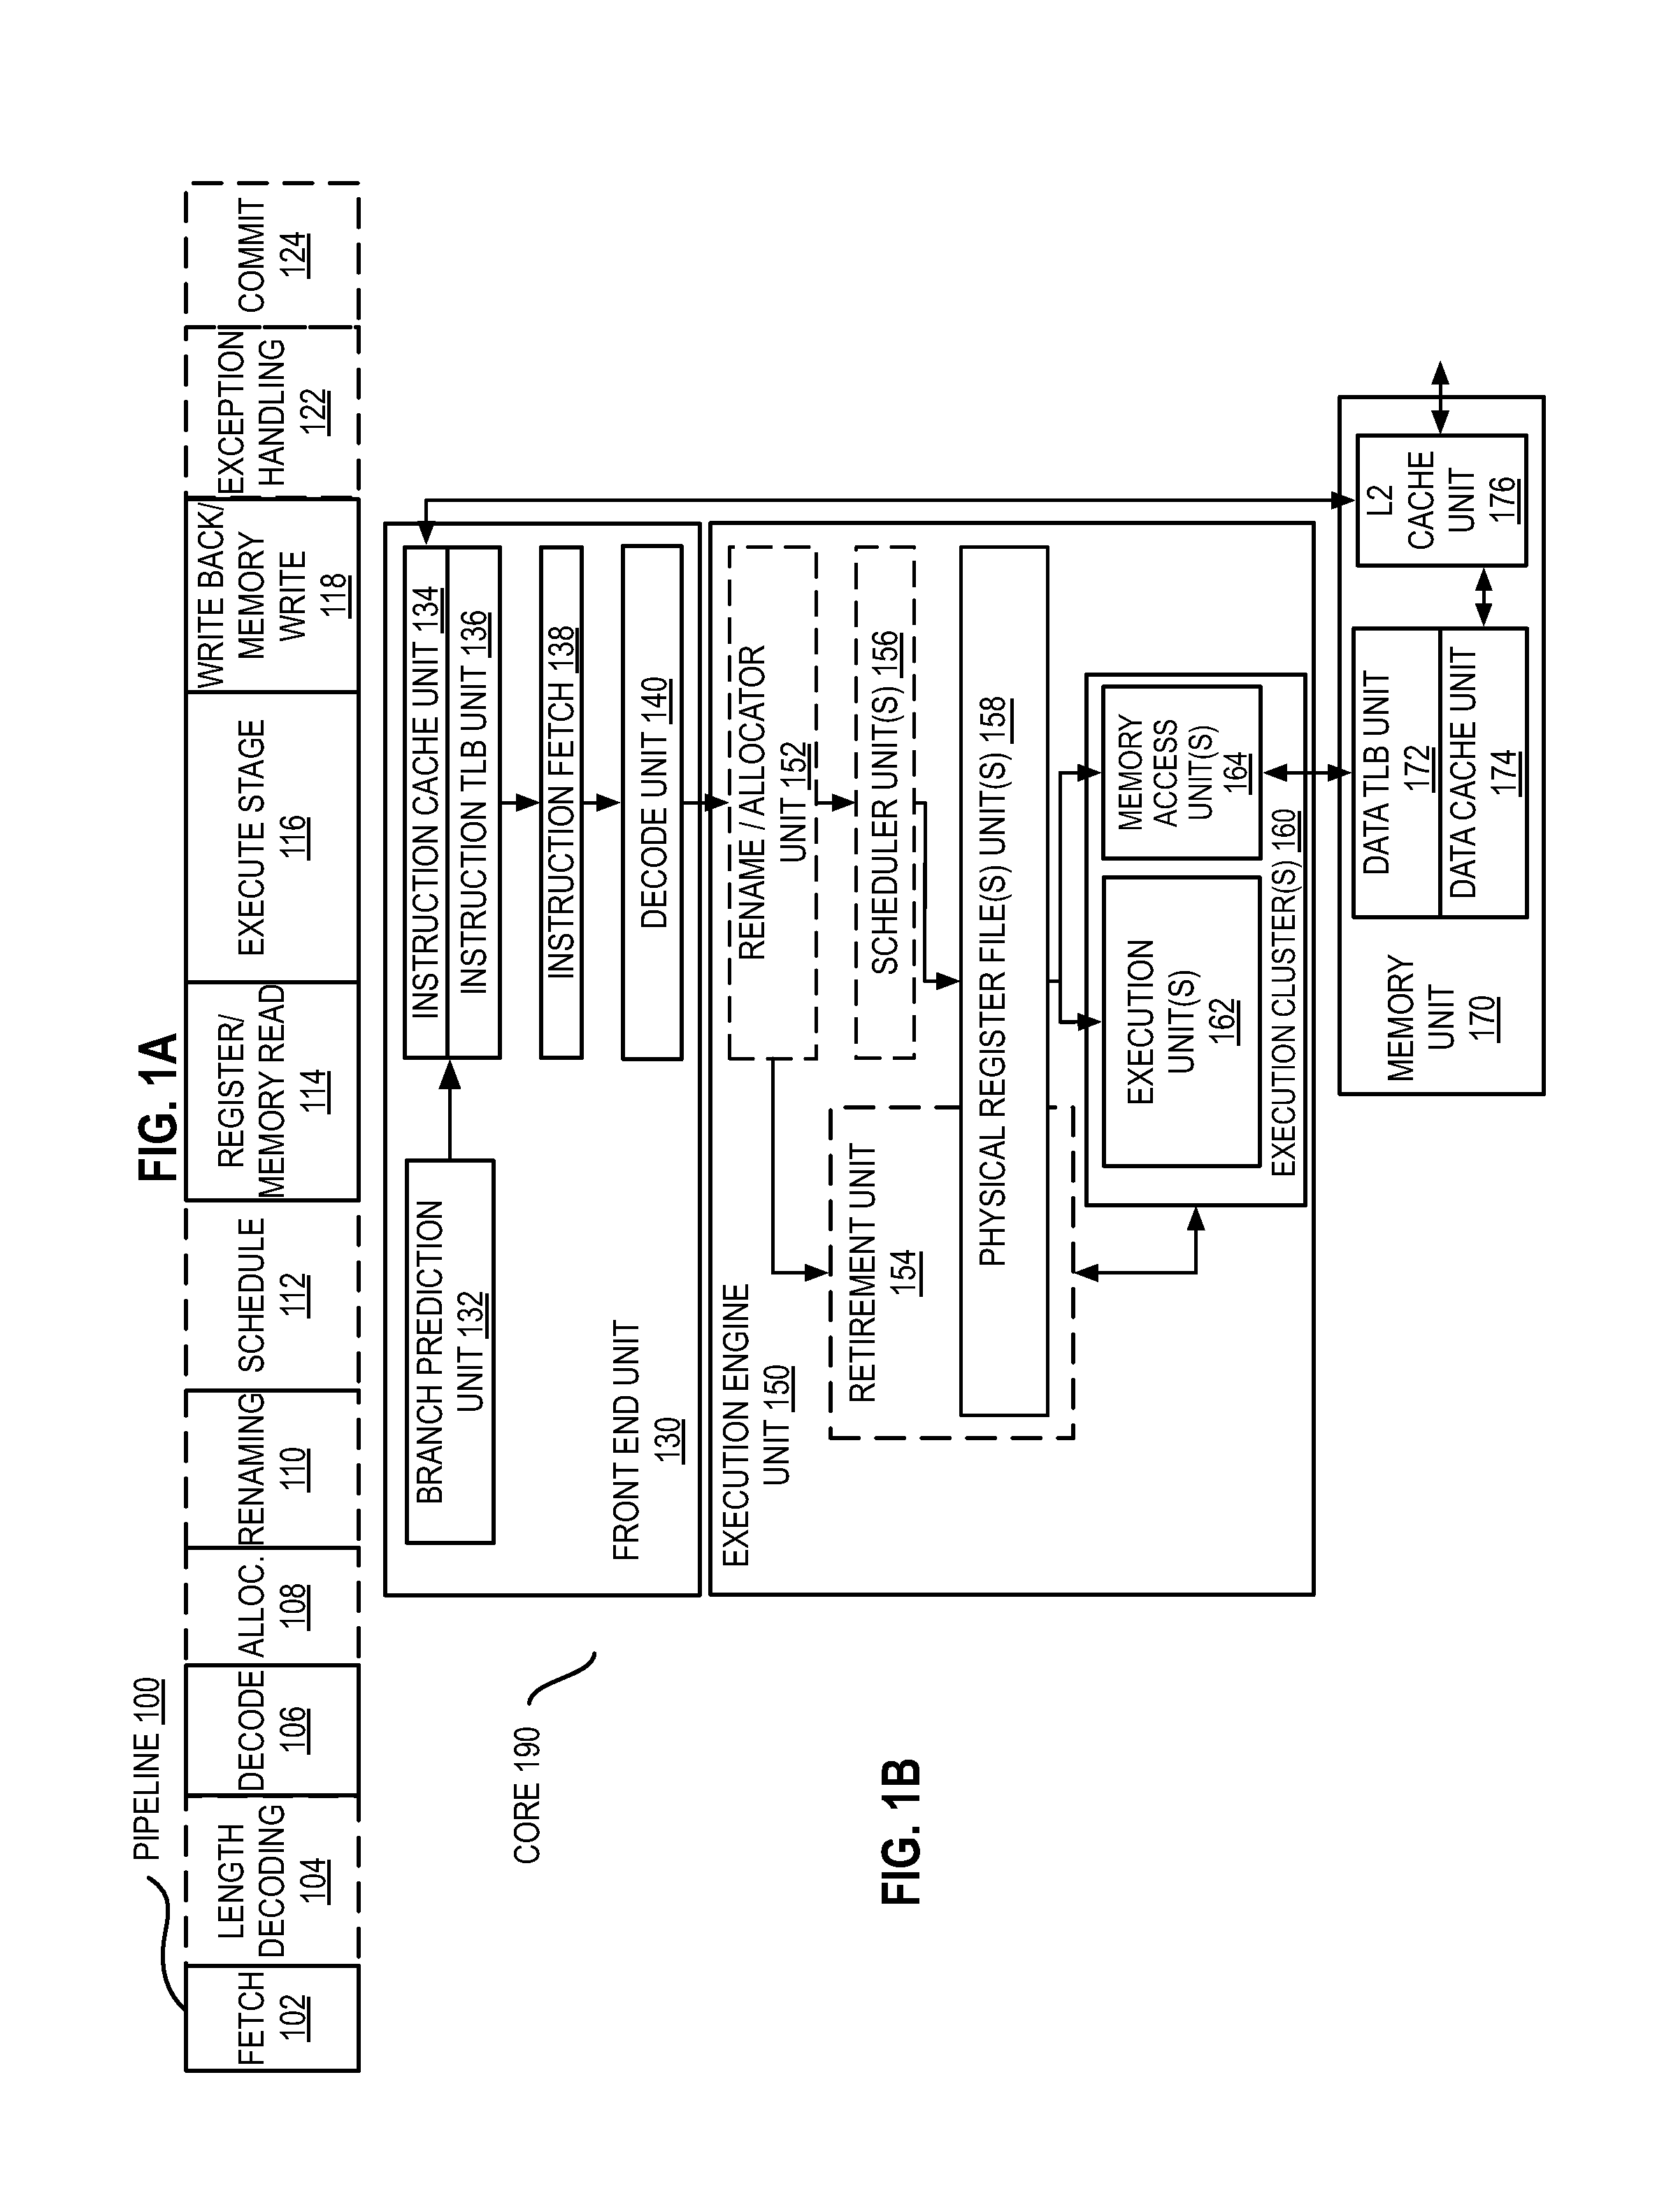 Method and apparatus for implementing and maintaining a stack of predicate values with stack synchronization instructions in an out of order hardware software co-designed processor